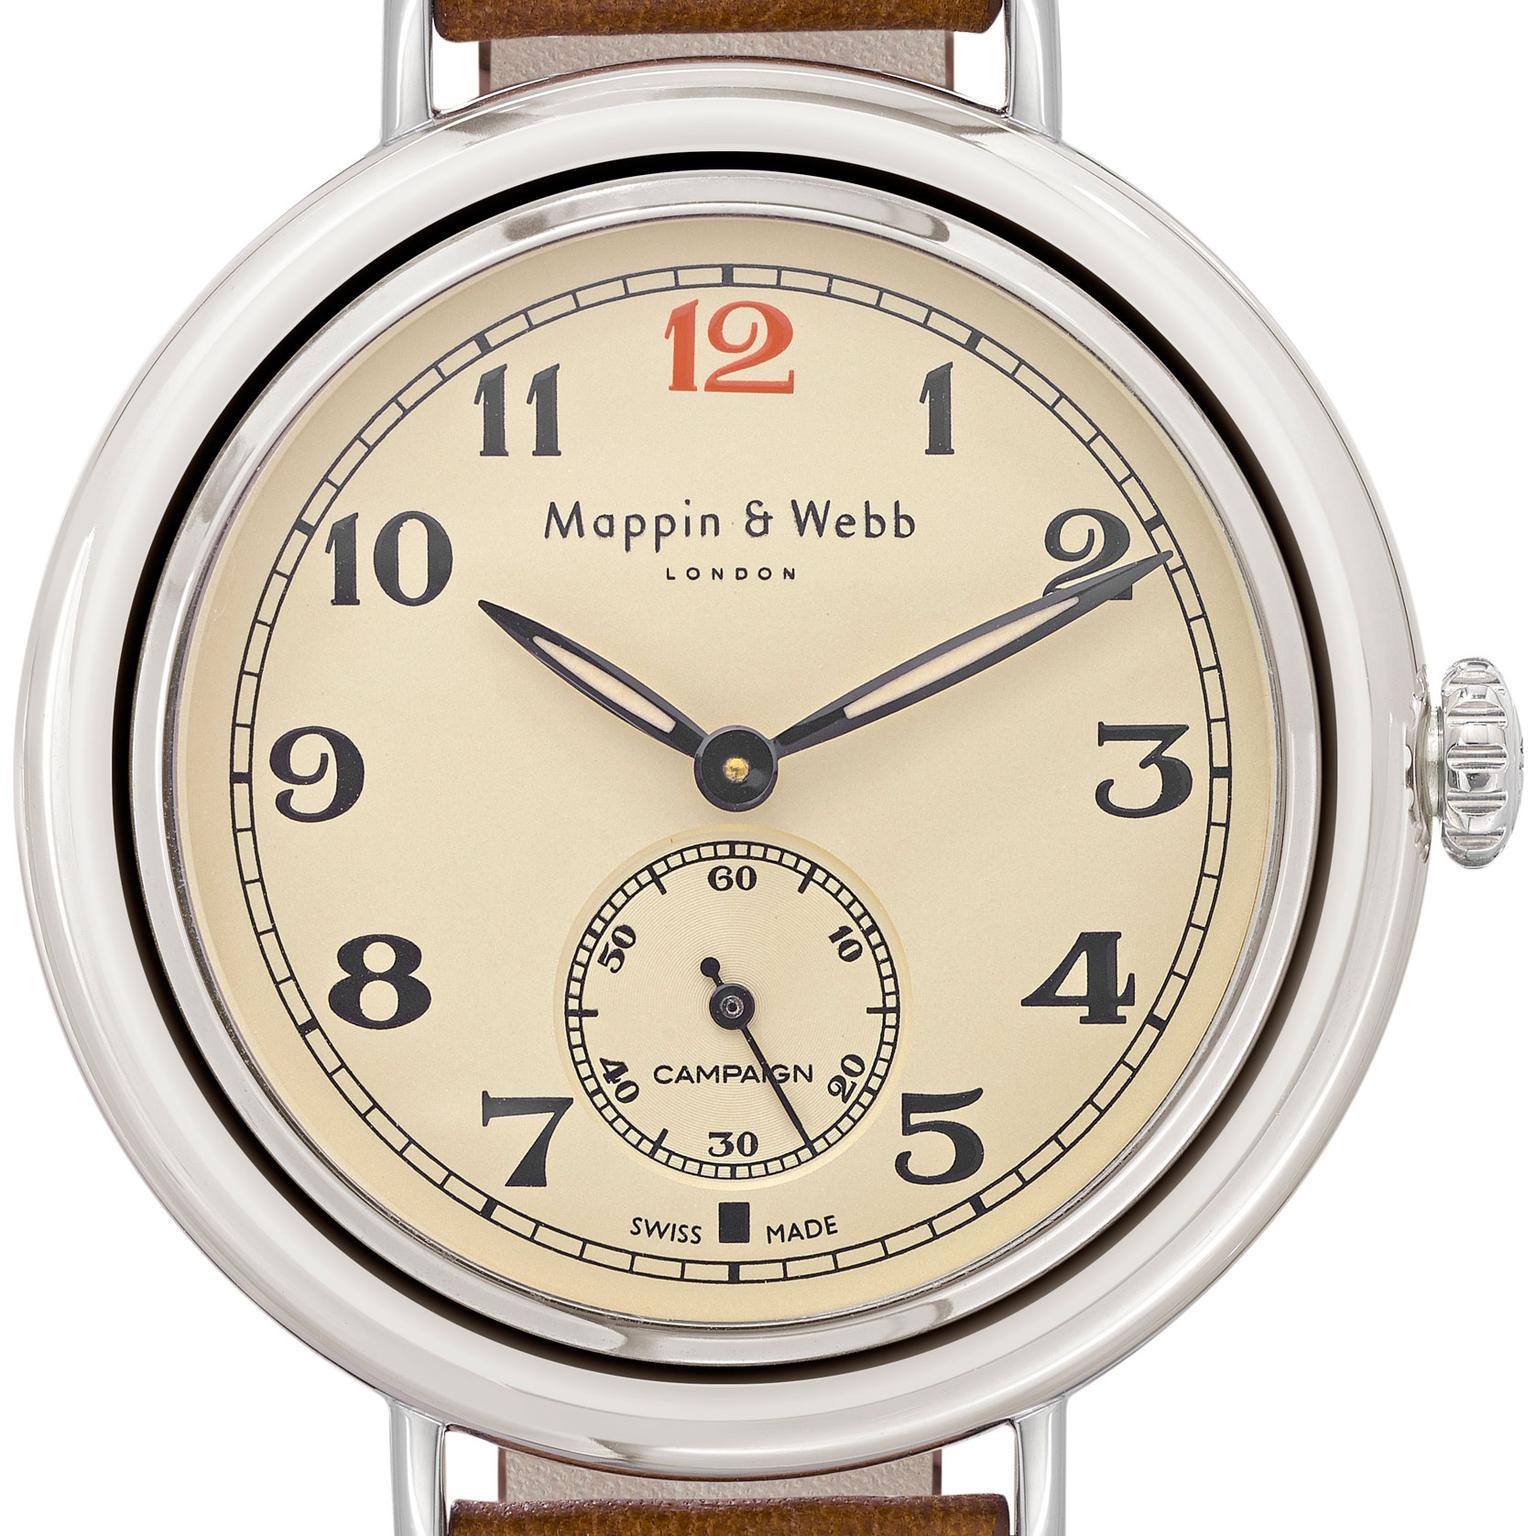 The new Mappin & Webb campaign watch